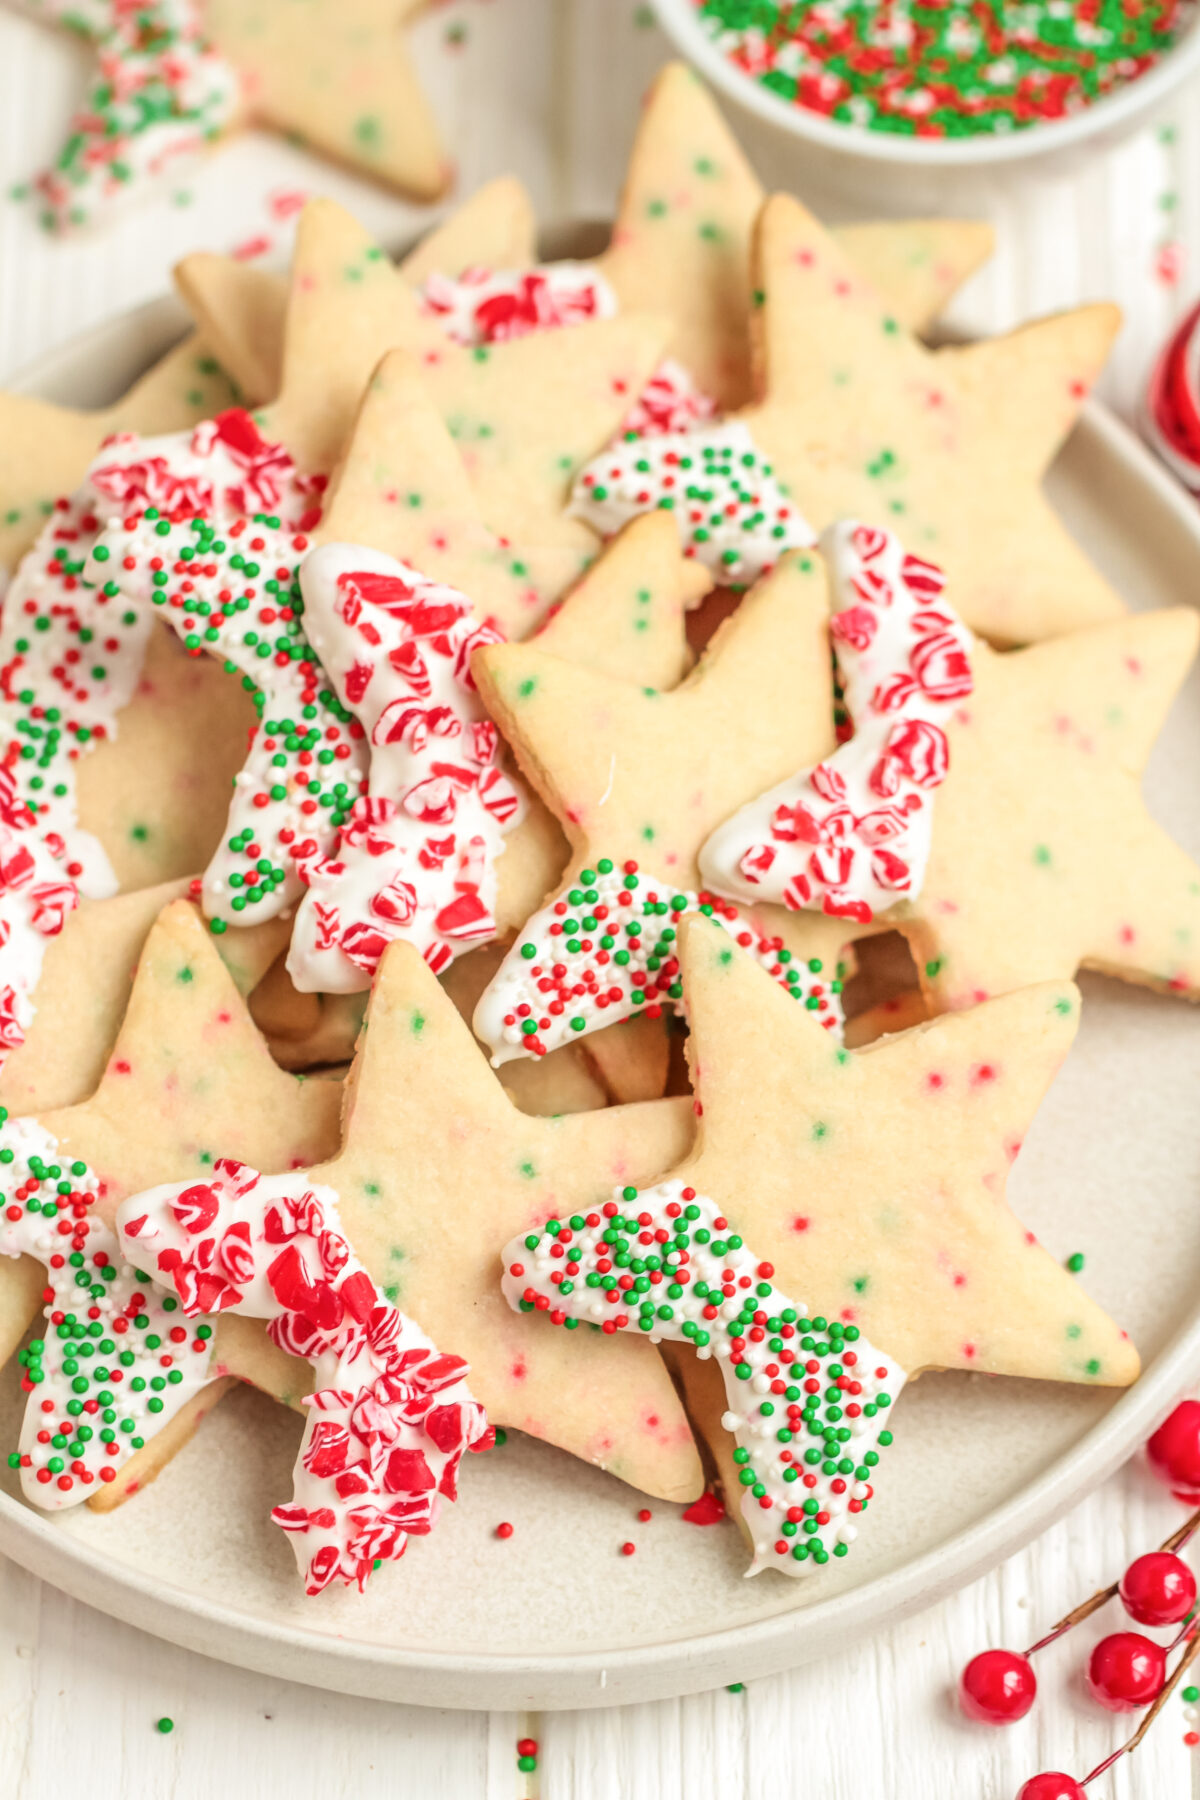 Chocolate Dipped Christmas Sprinkle Cookies are a fun addition to your holiday cookie platter. They're festive, delicious, and easy to make!